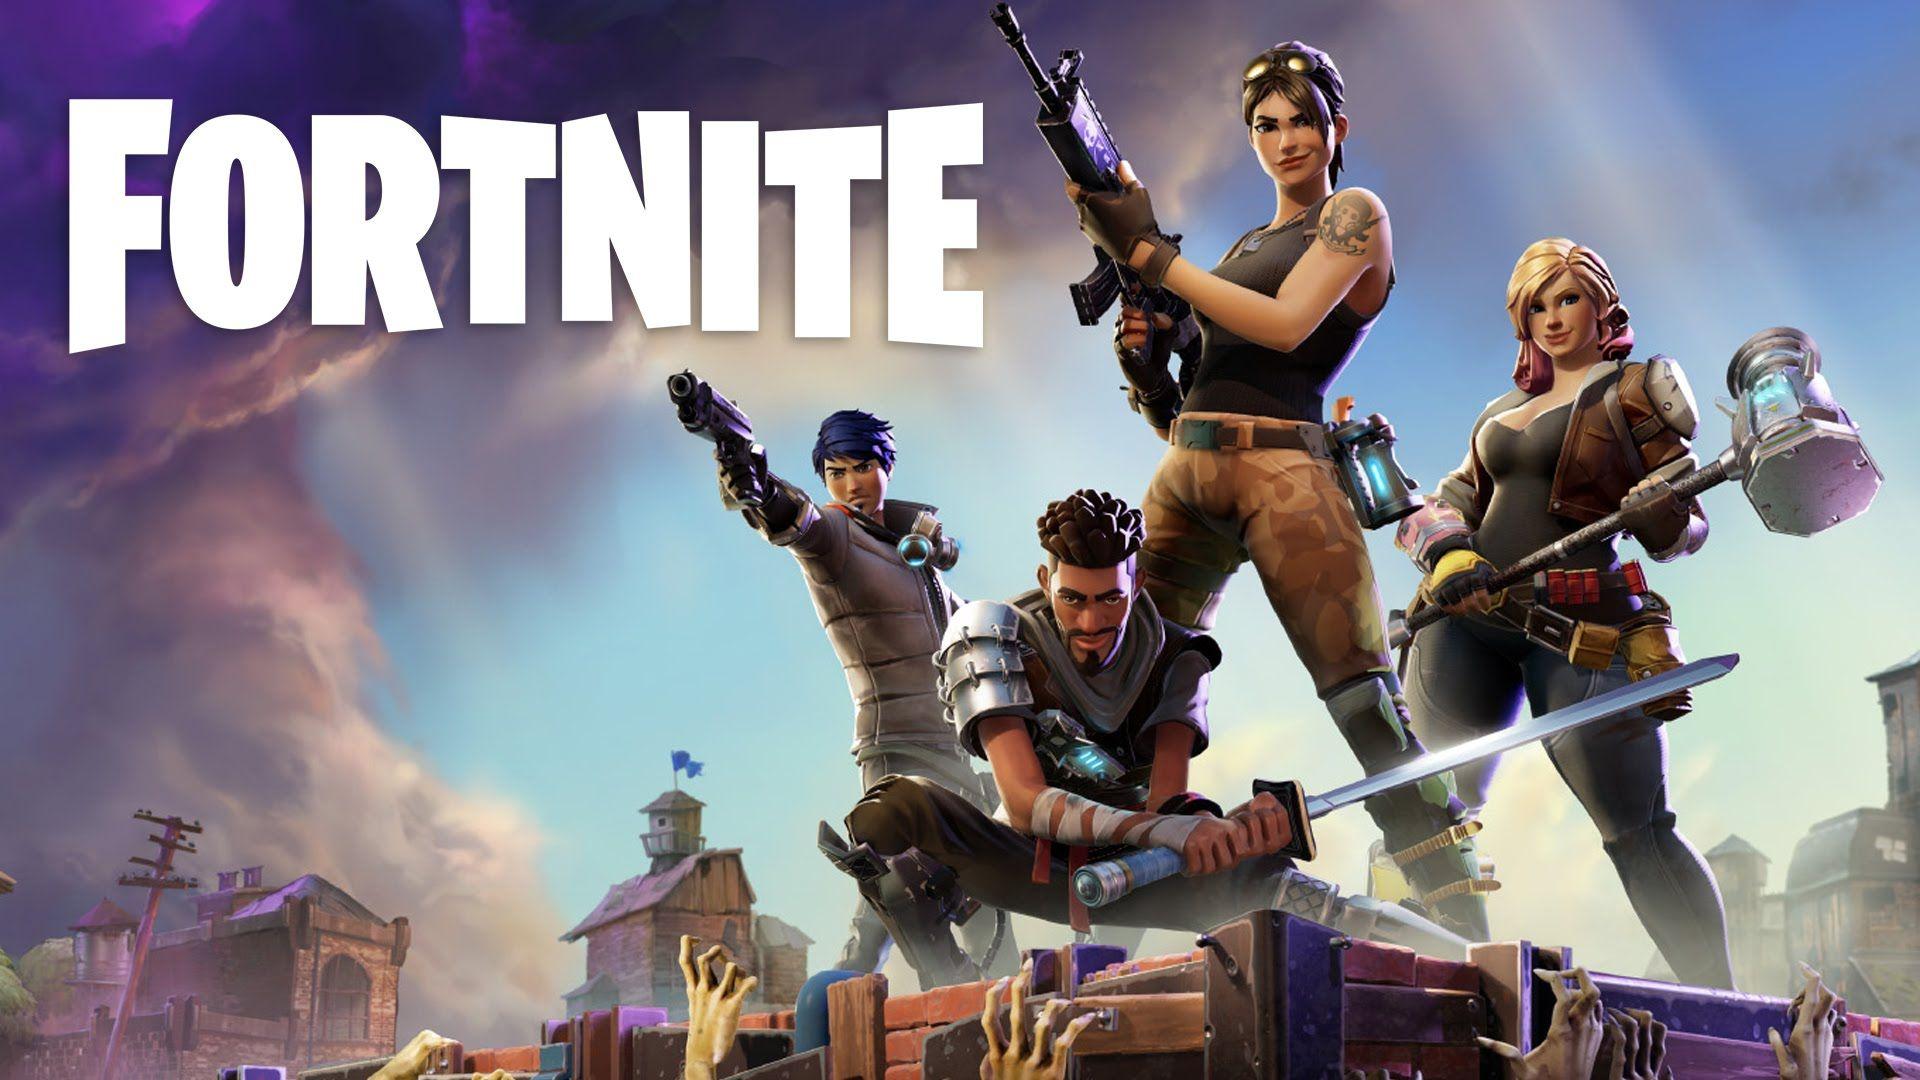 The folks behind PUBG claim Fortnite's Battle Royale mode is a